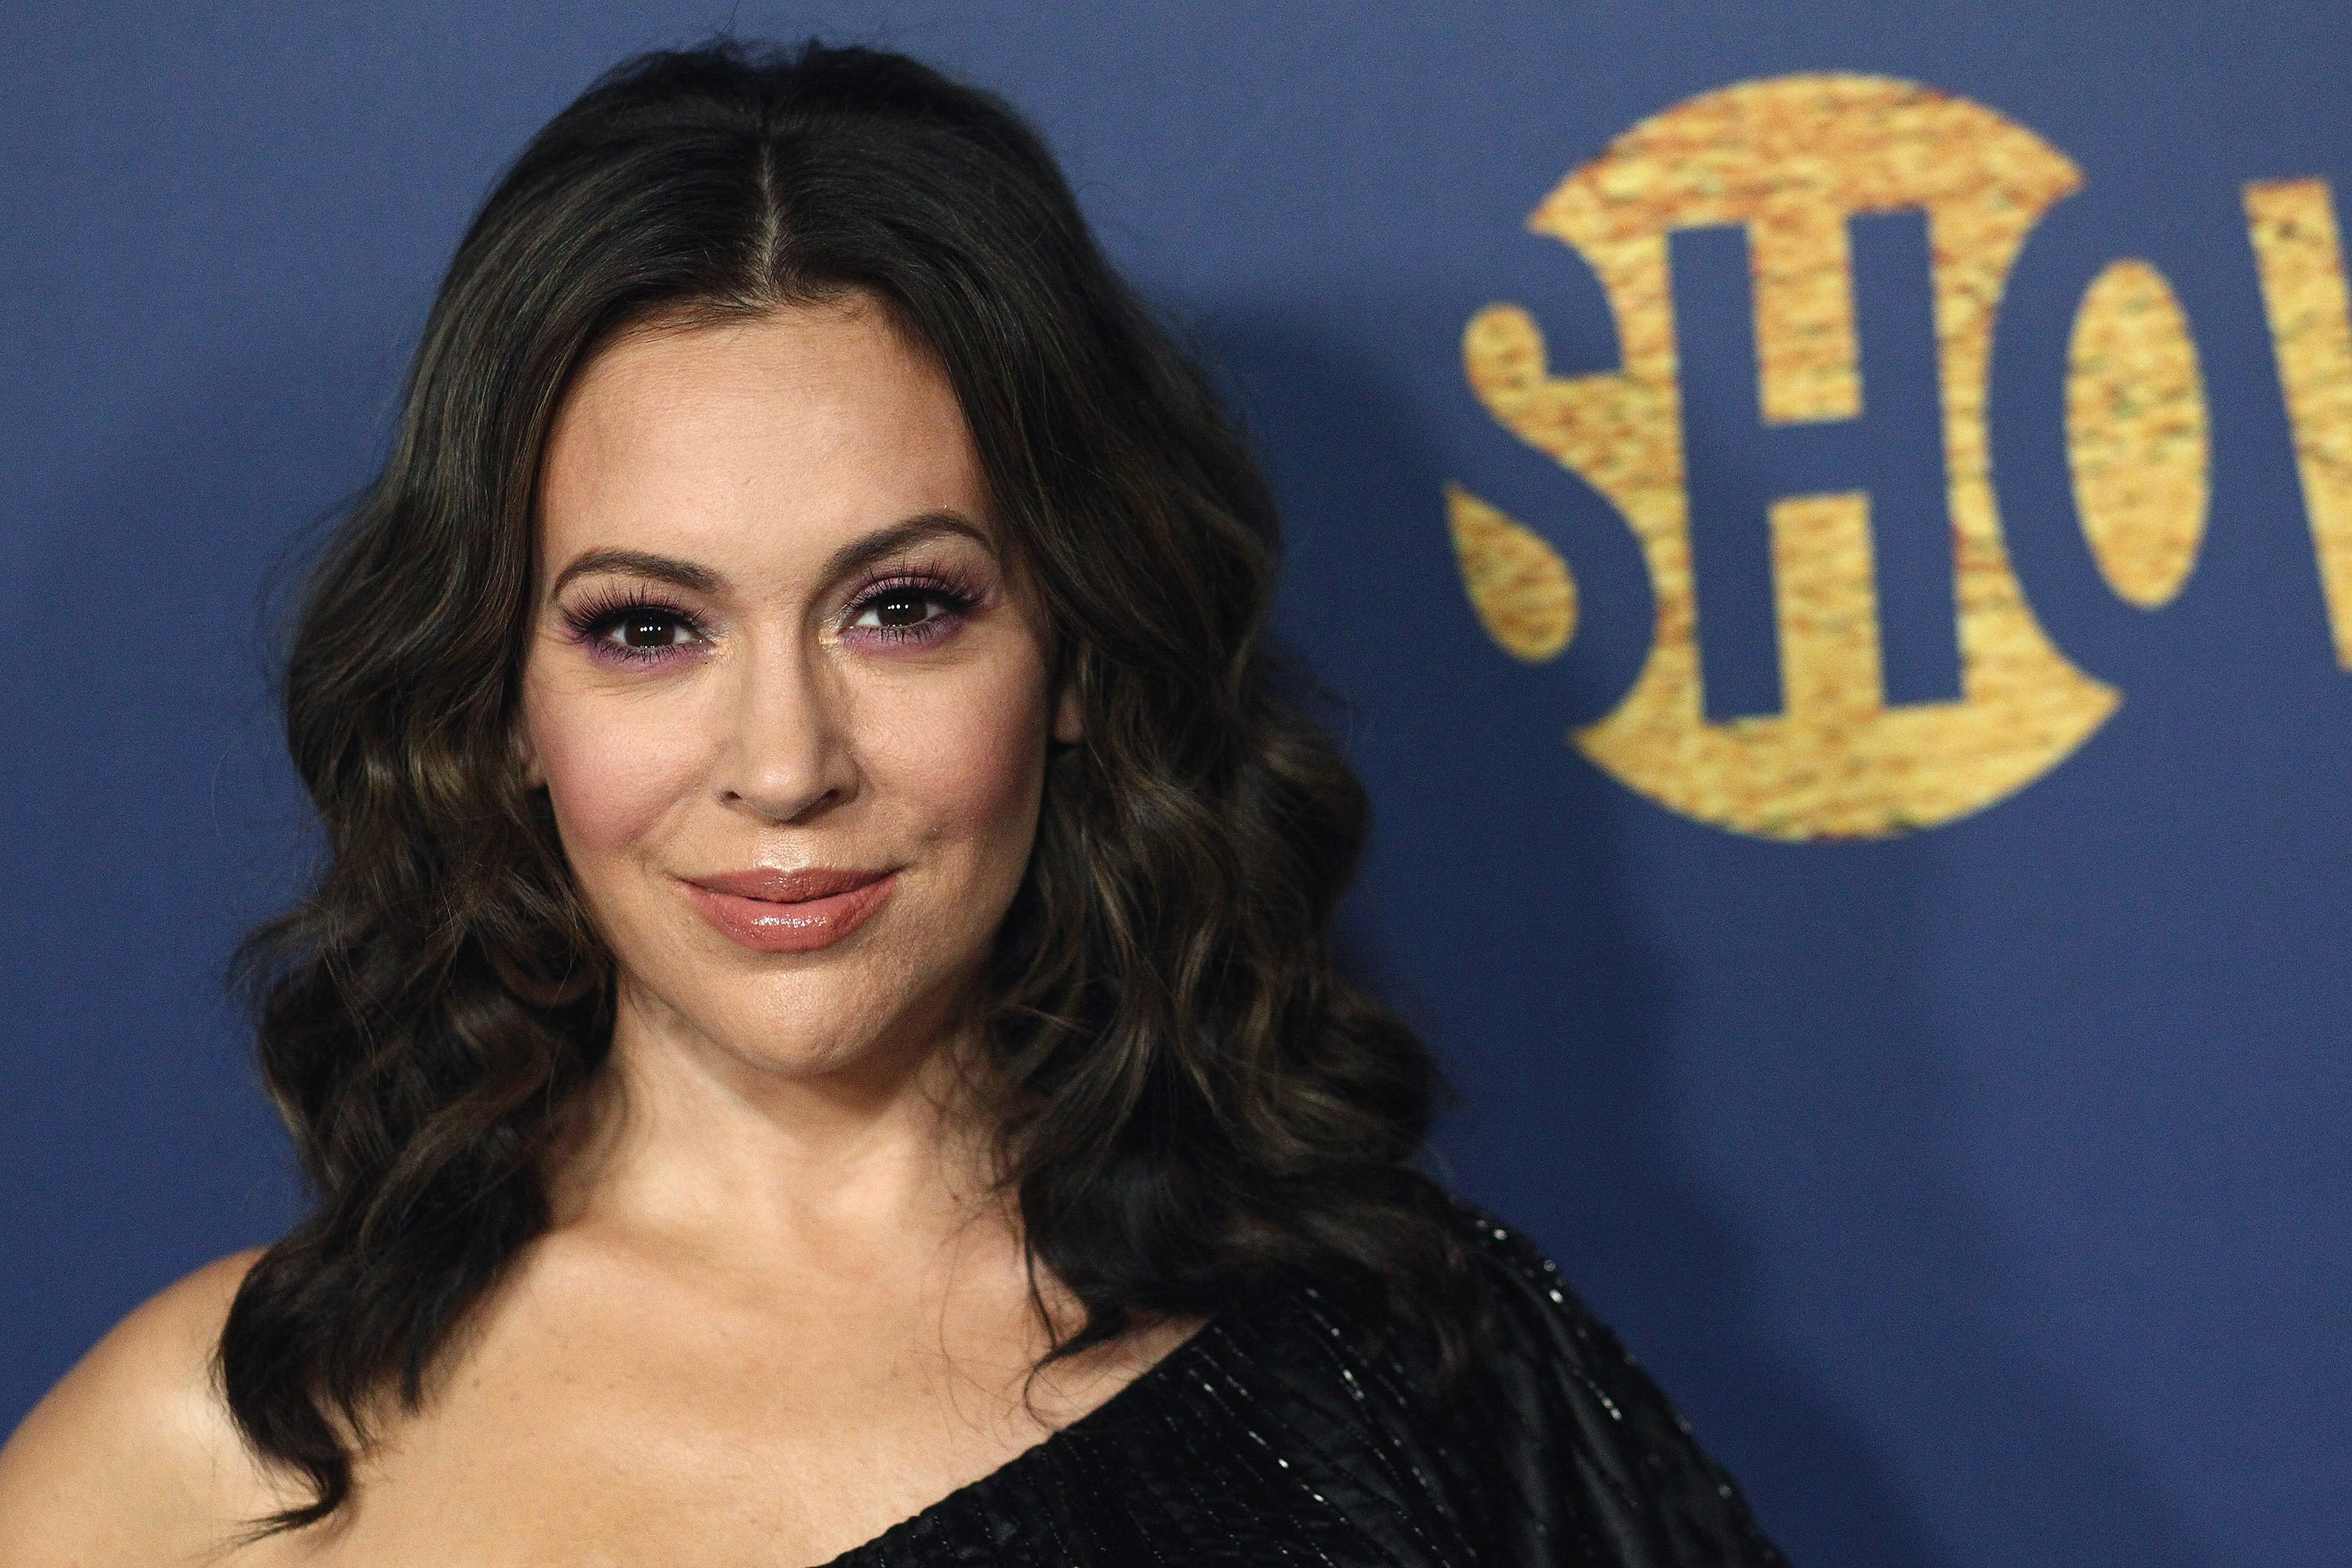 Alyssa Milano attends the Showtime Emmy Eve Nominees Celebration at Chateau Marmont on September 16, 2018 | Photo: Getty Images